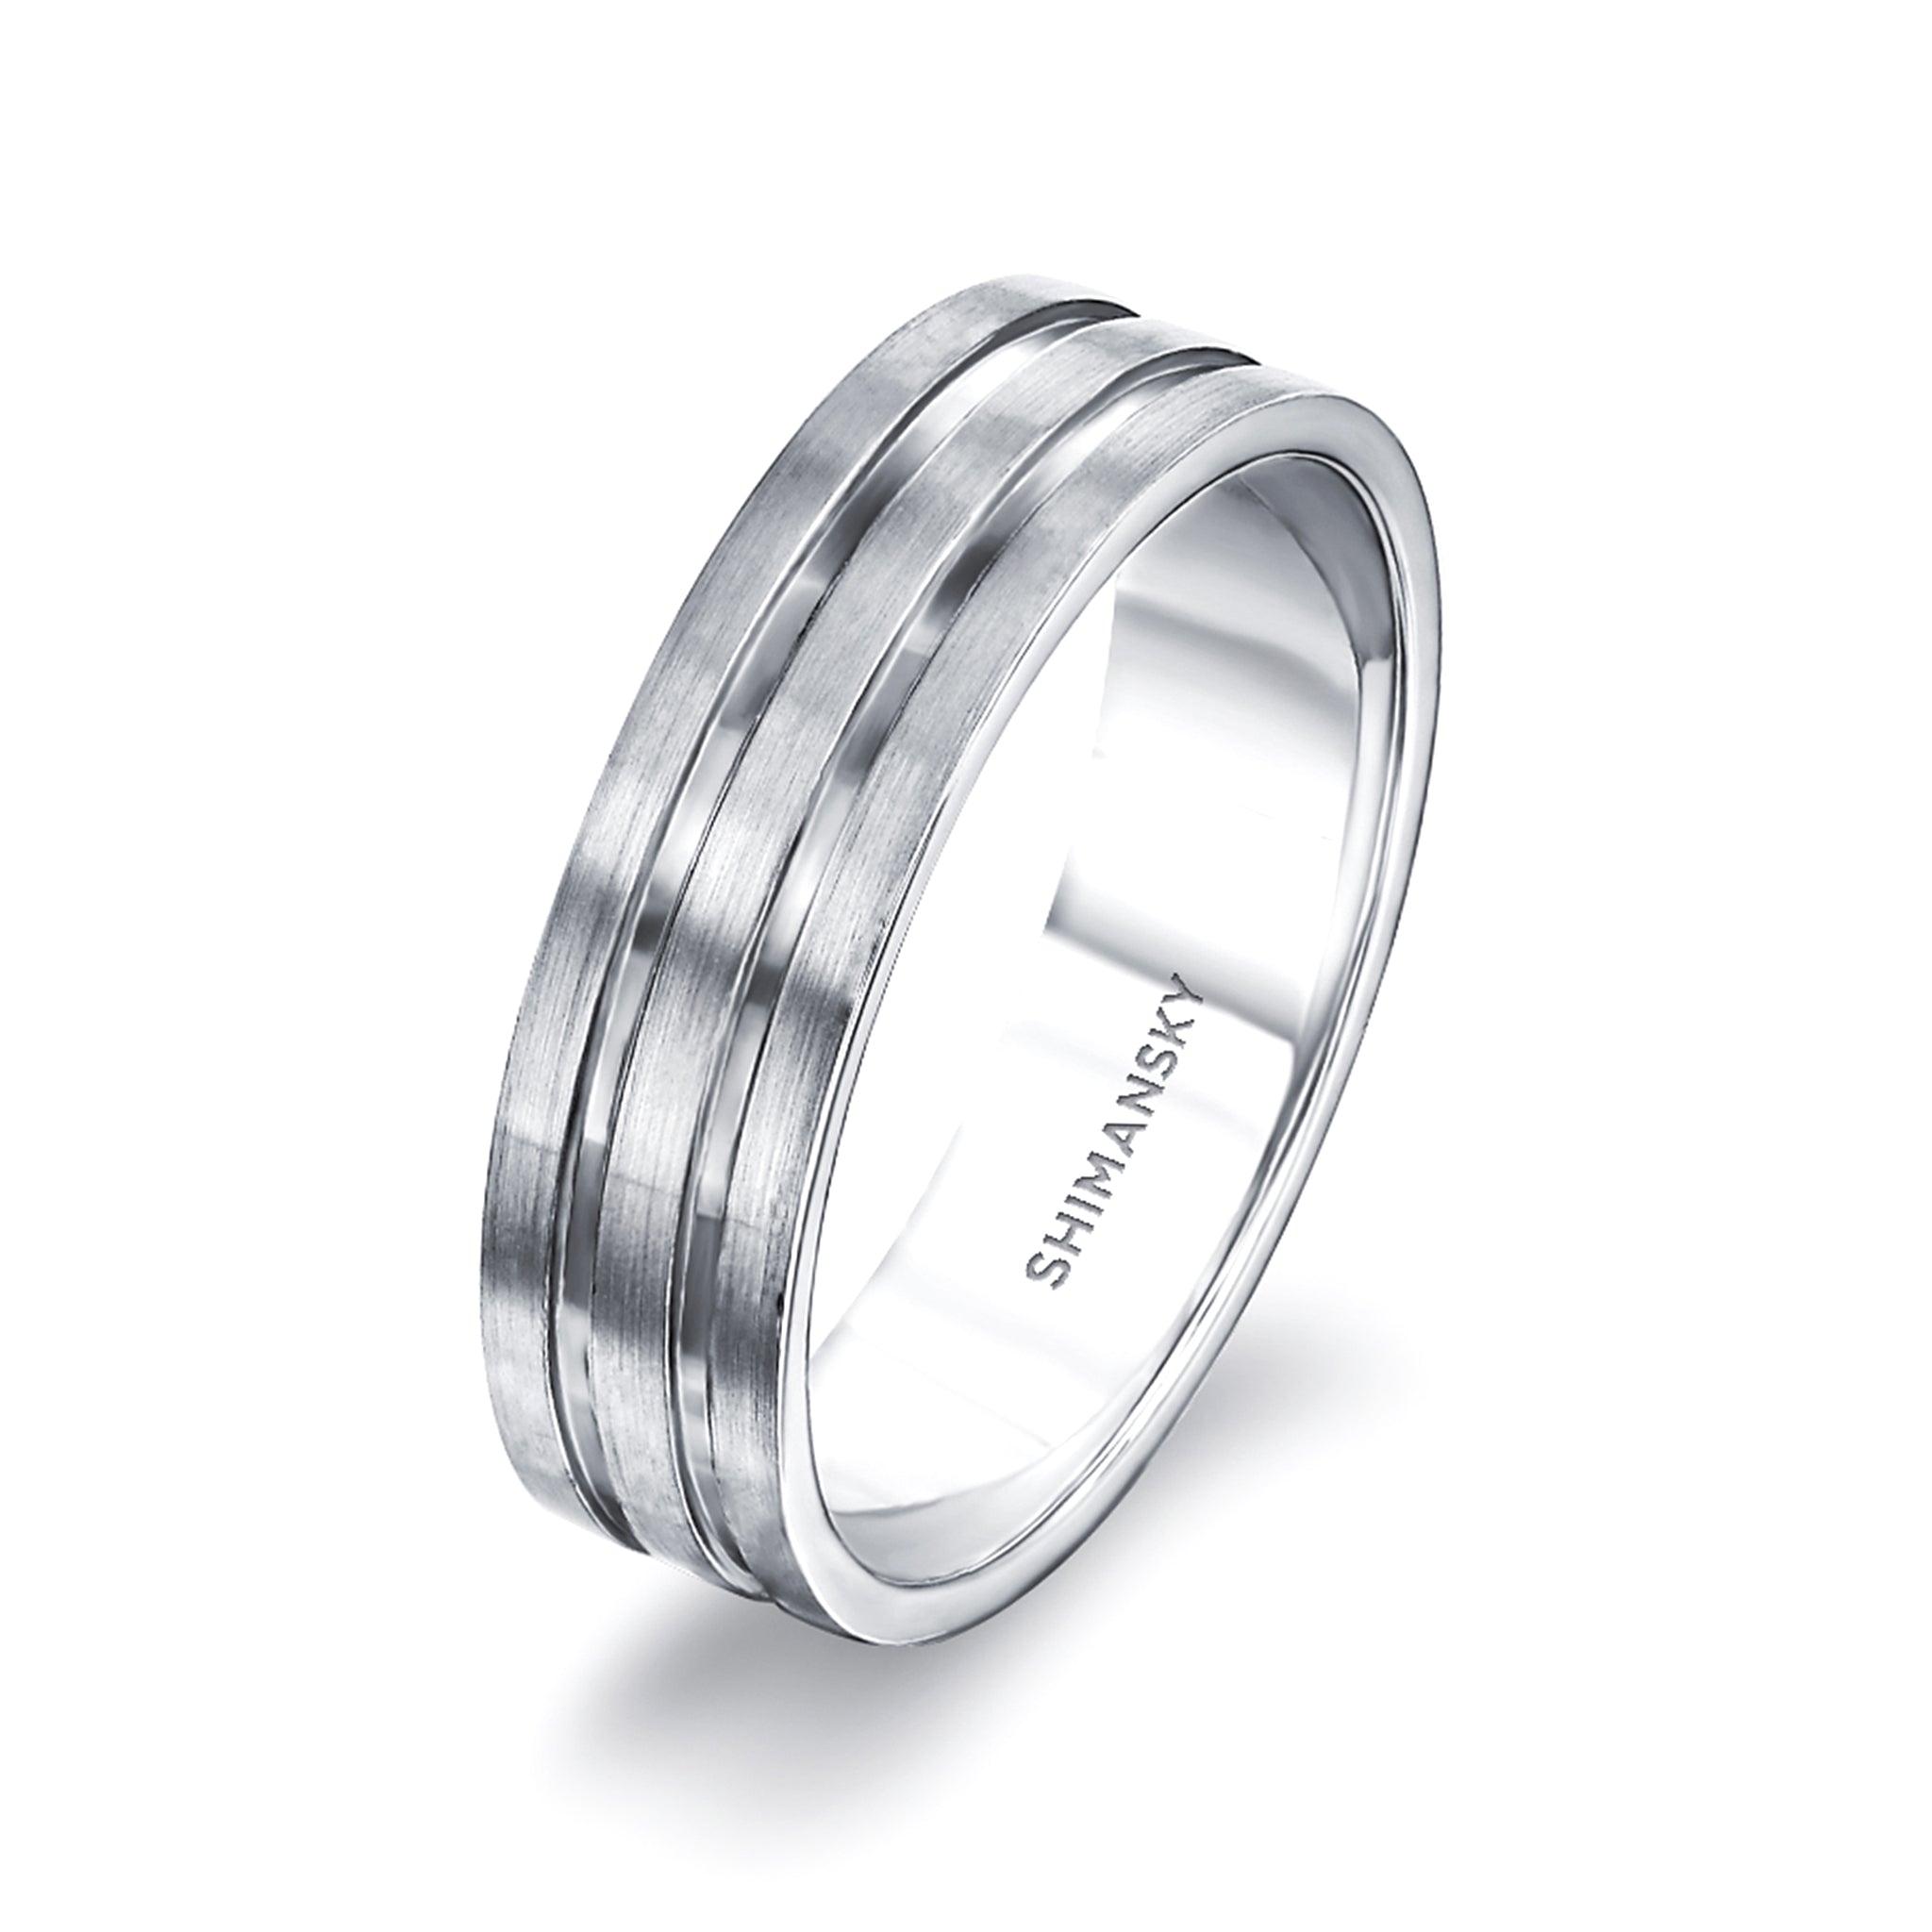 Shimansky - Max-line Flat Double Grooved Wedding Band in Satin Finished Palladium